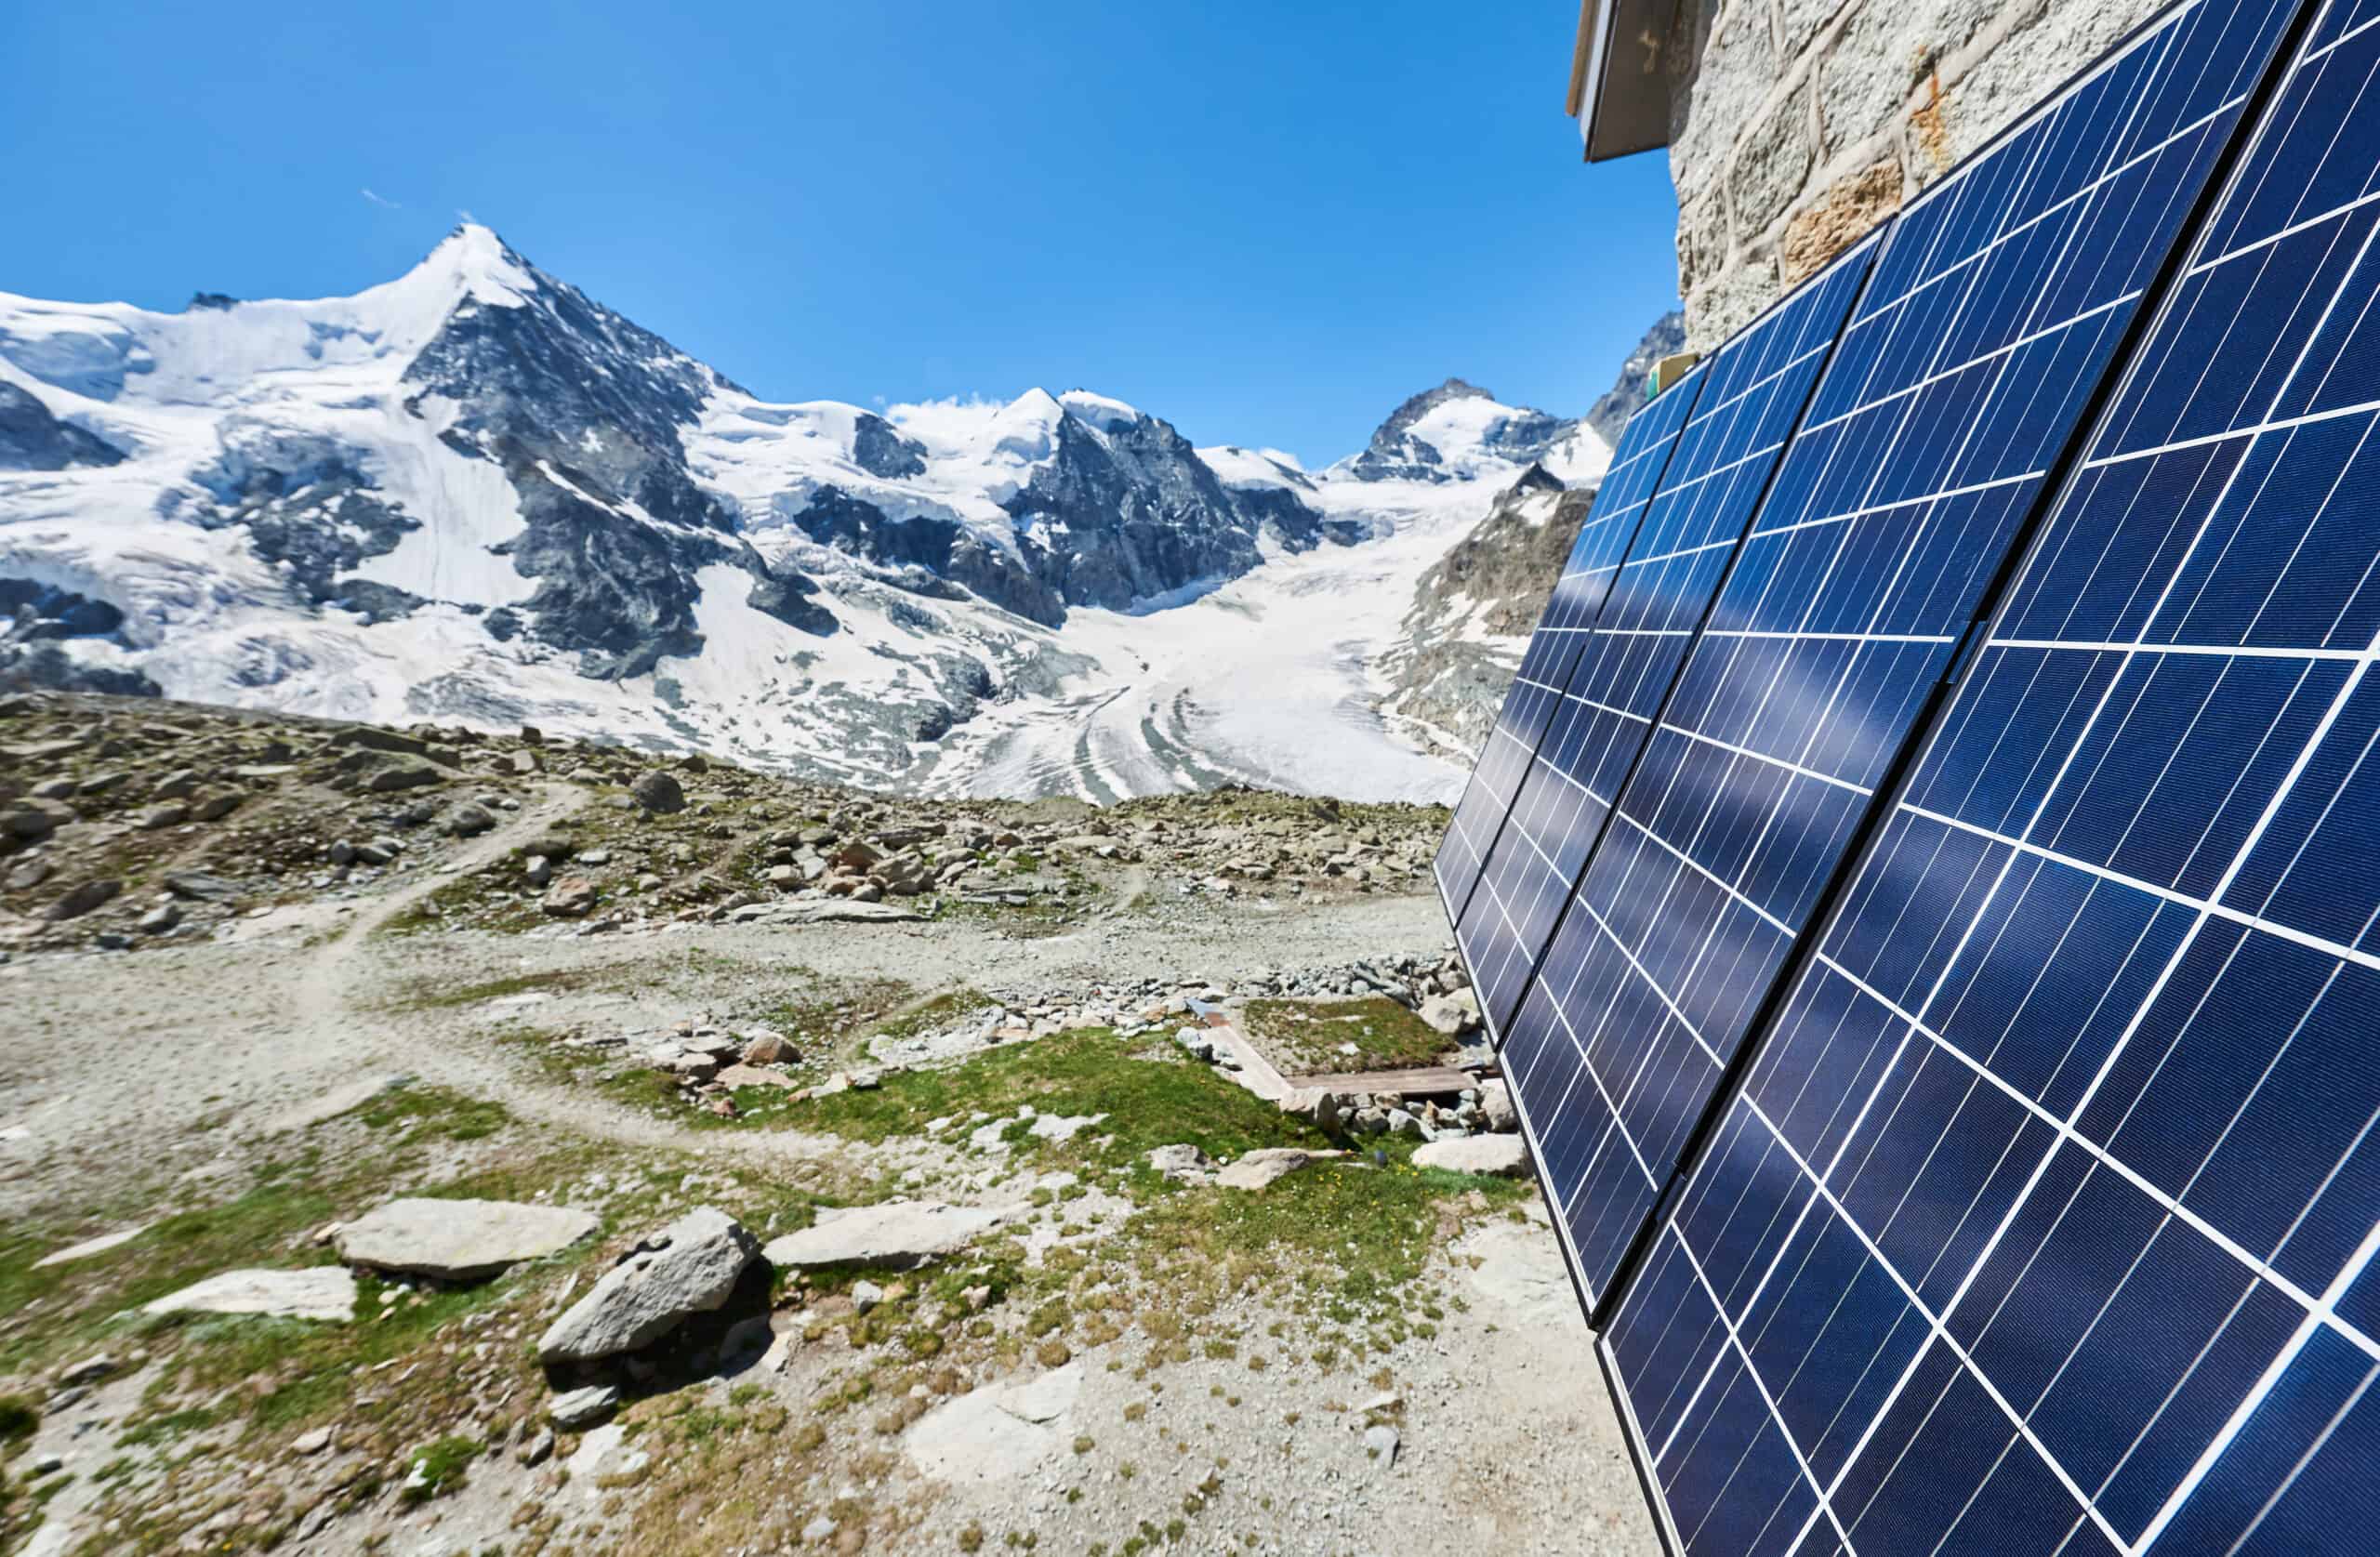 Grand Mountet Hut with solar batteries on the wall on a beautiful sunny day in Switzerland Alps